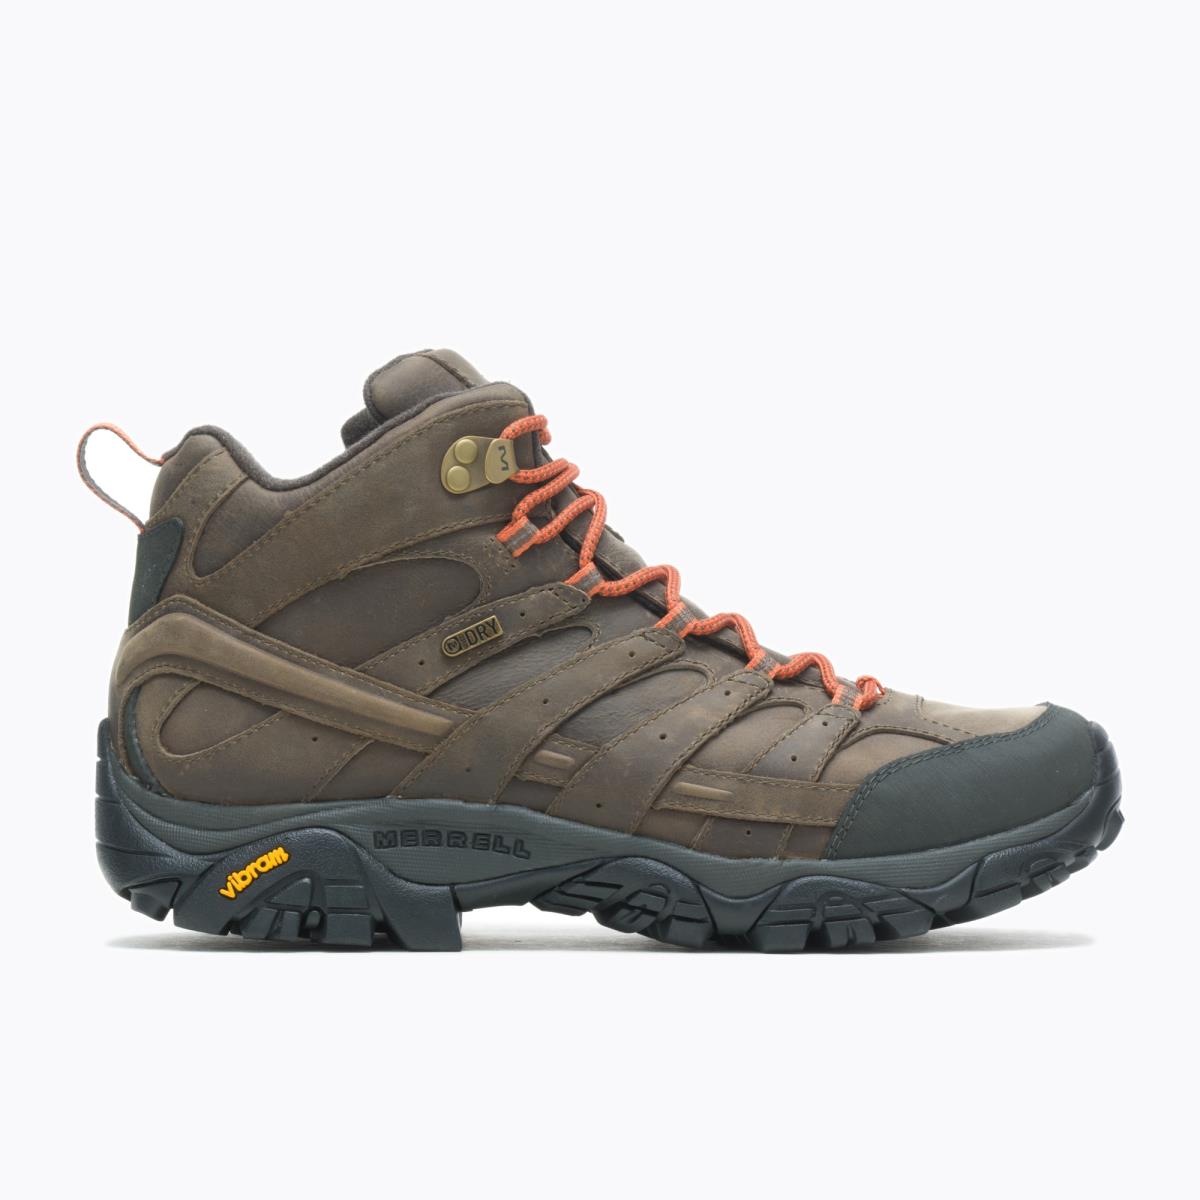 Merrell Men Moab 2 Prime Mid Waterproof Hiking Boots Suede Leather-and-mesh Canteen